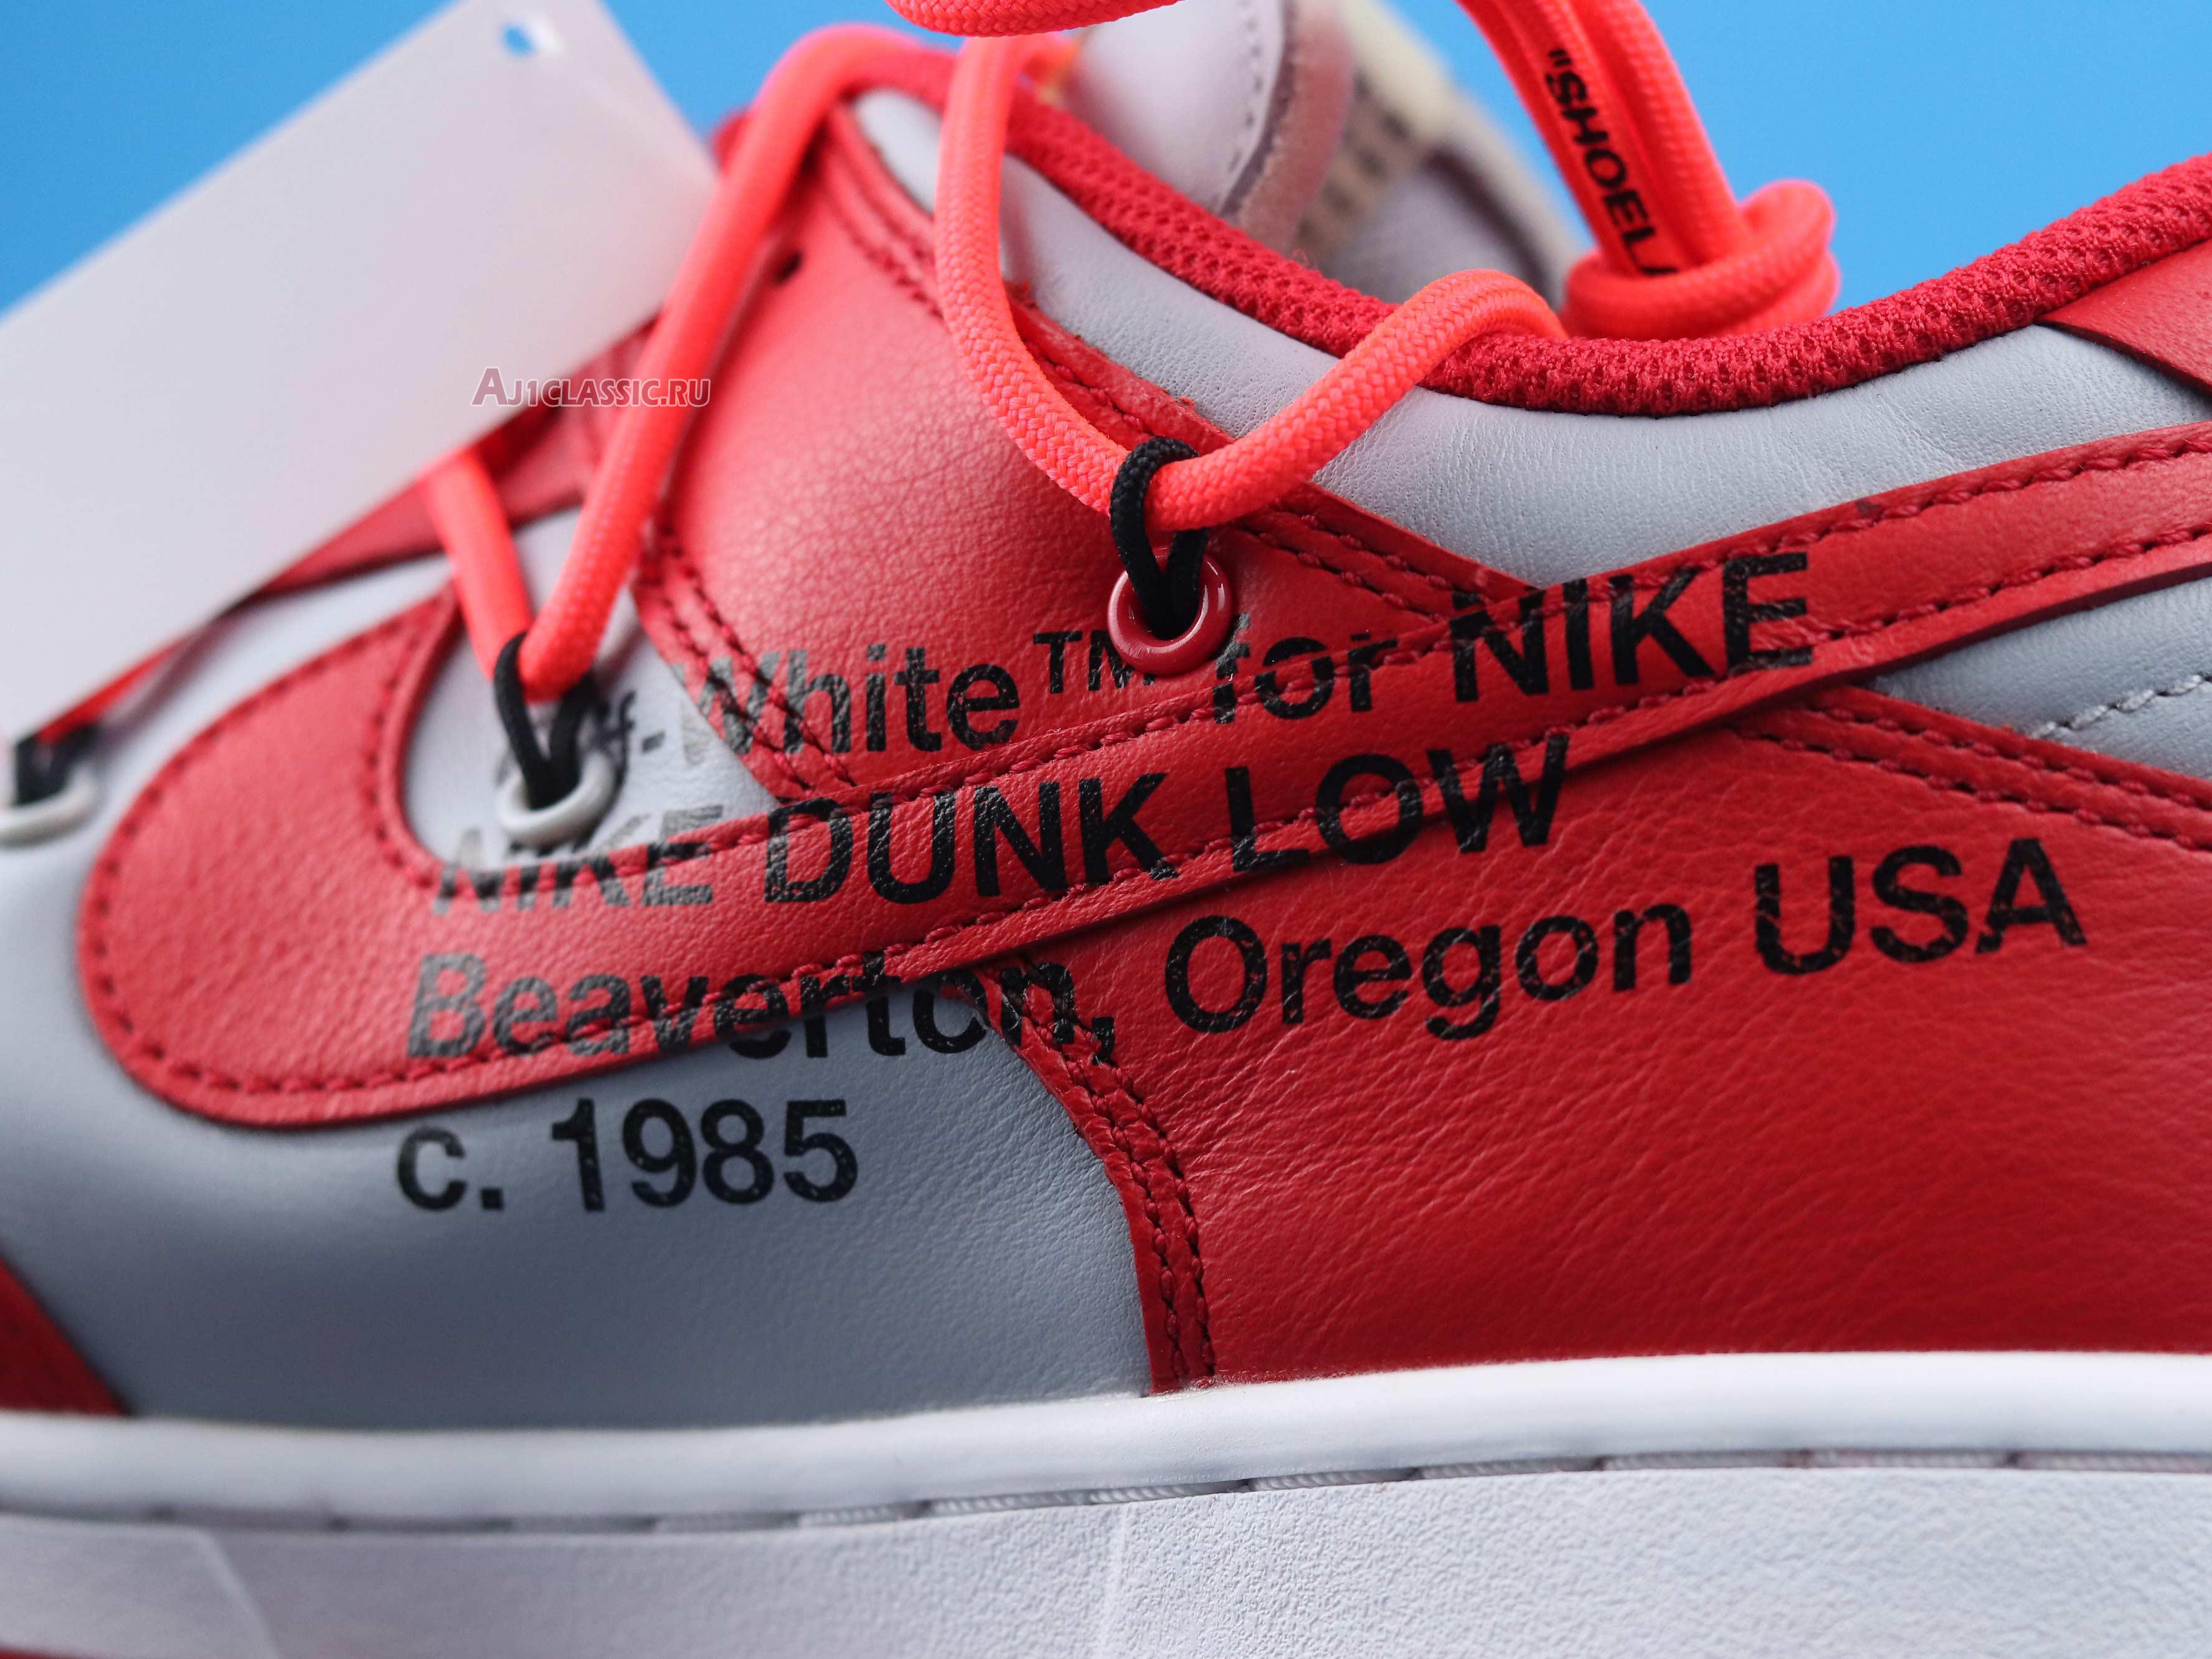 Off-White x Nike Dunk Low "University Red" CT0856-600-02